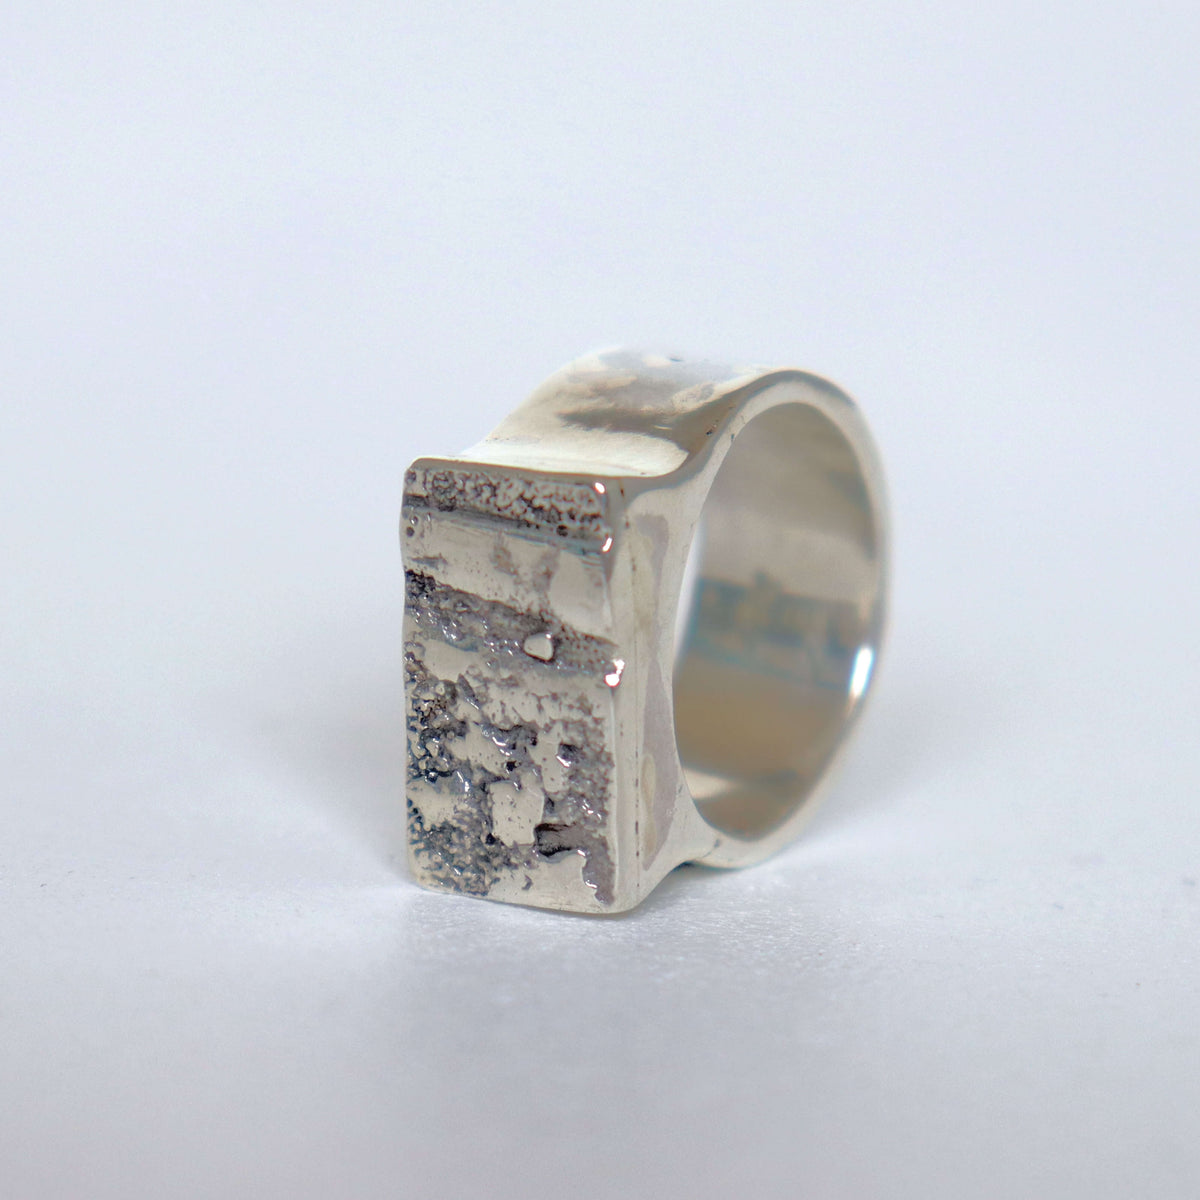 odd silver ring, with lots of character and texture, handmade silver ring by roff jewellery